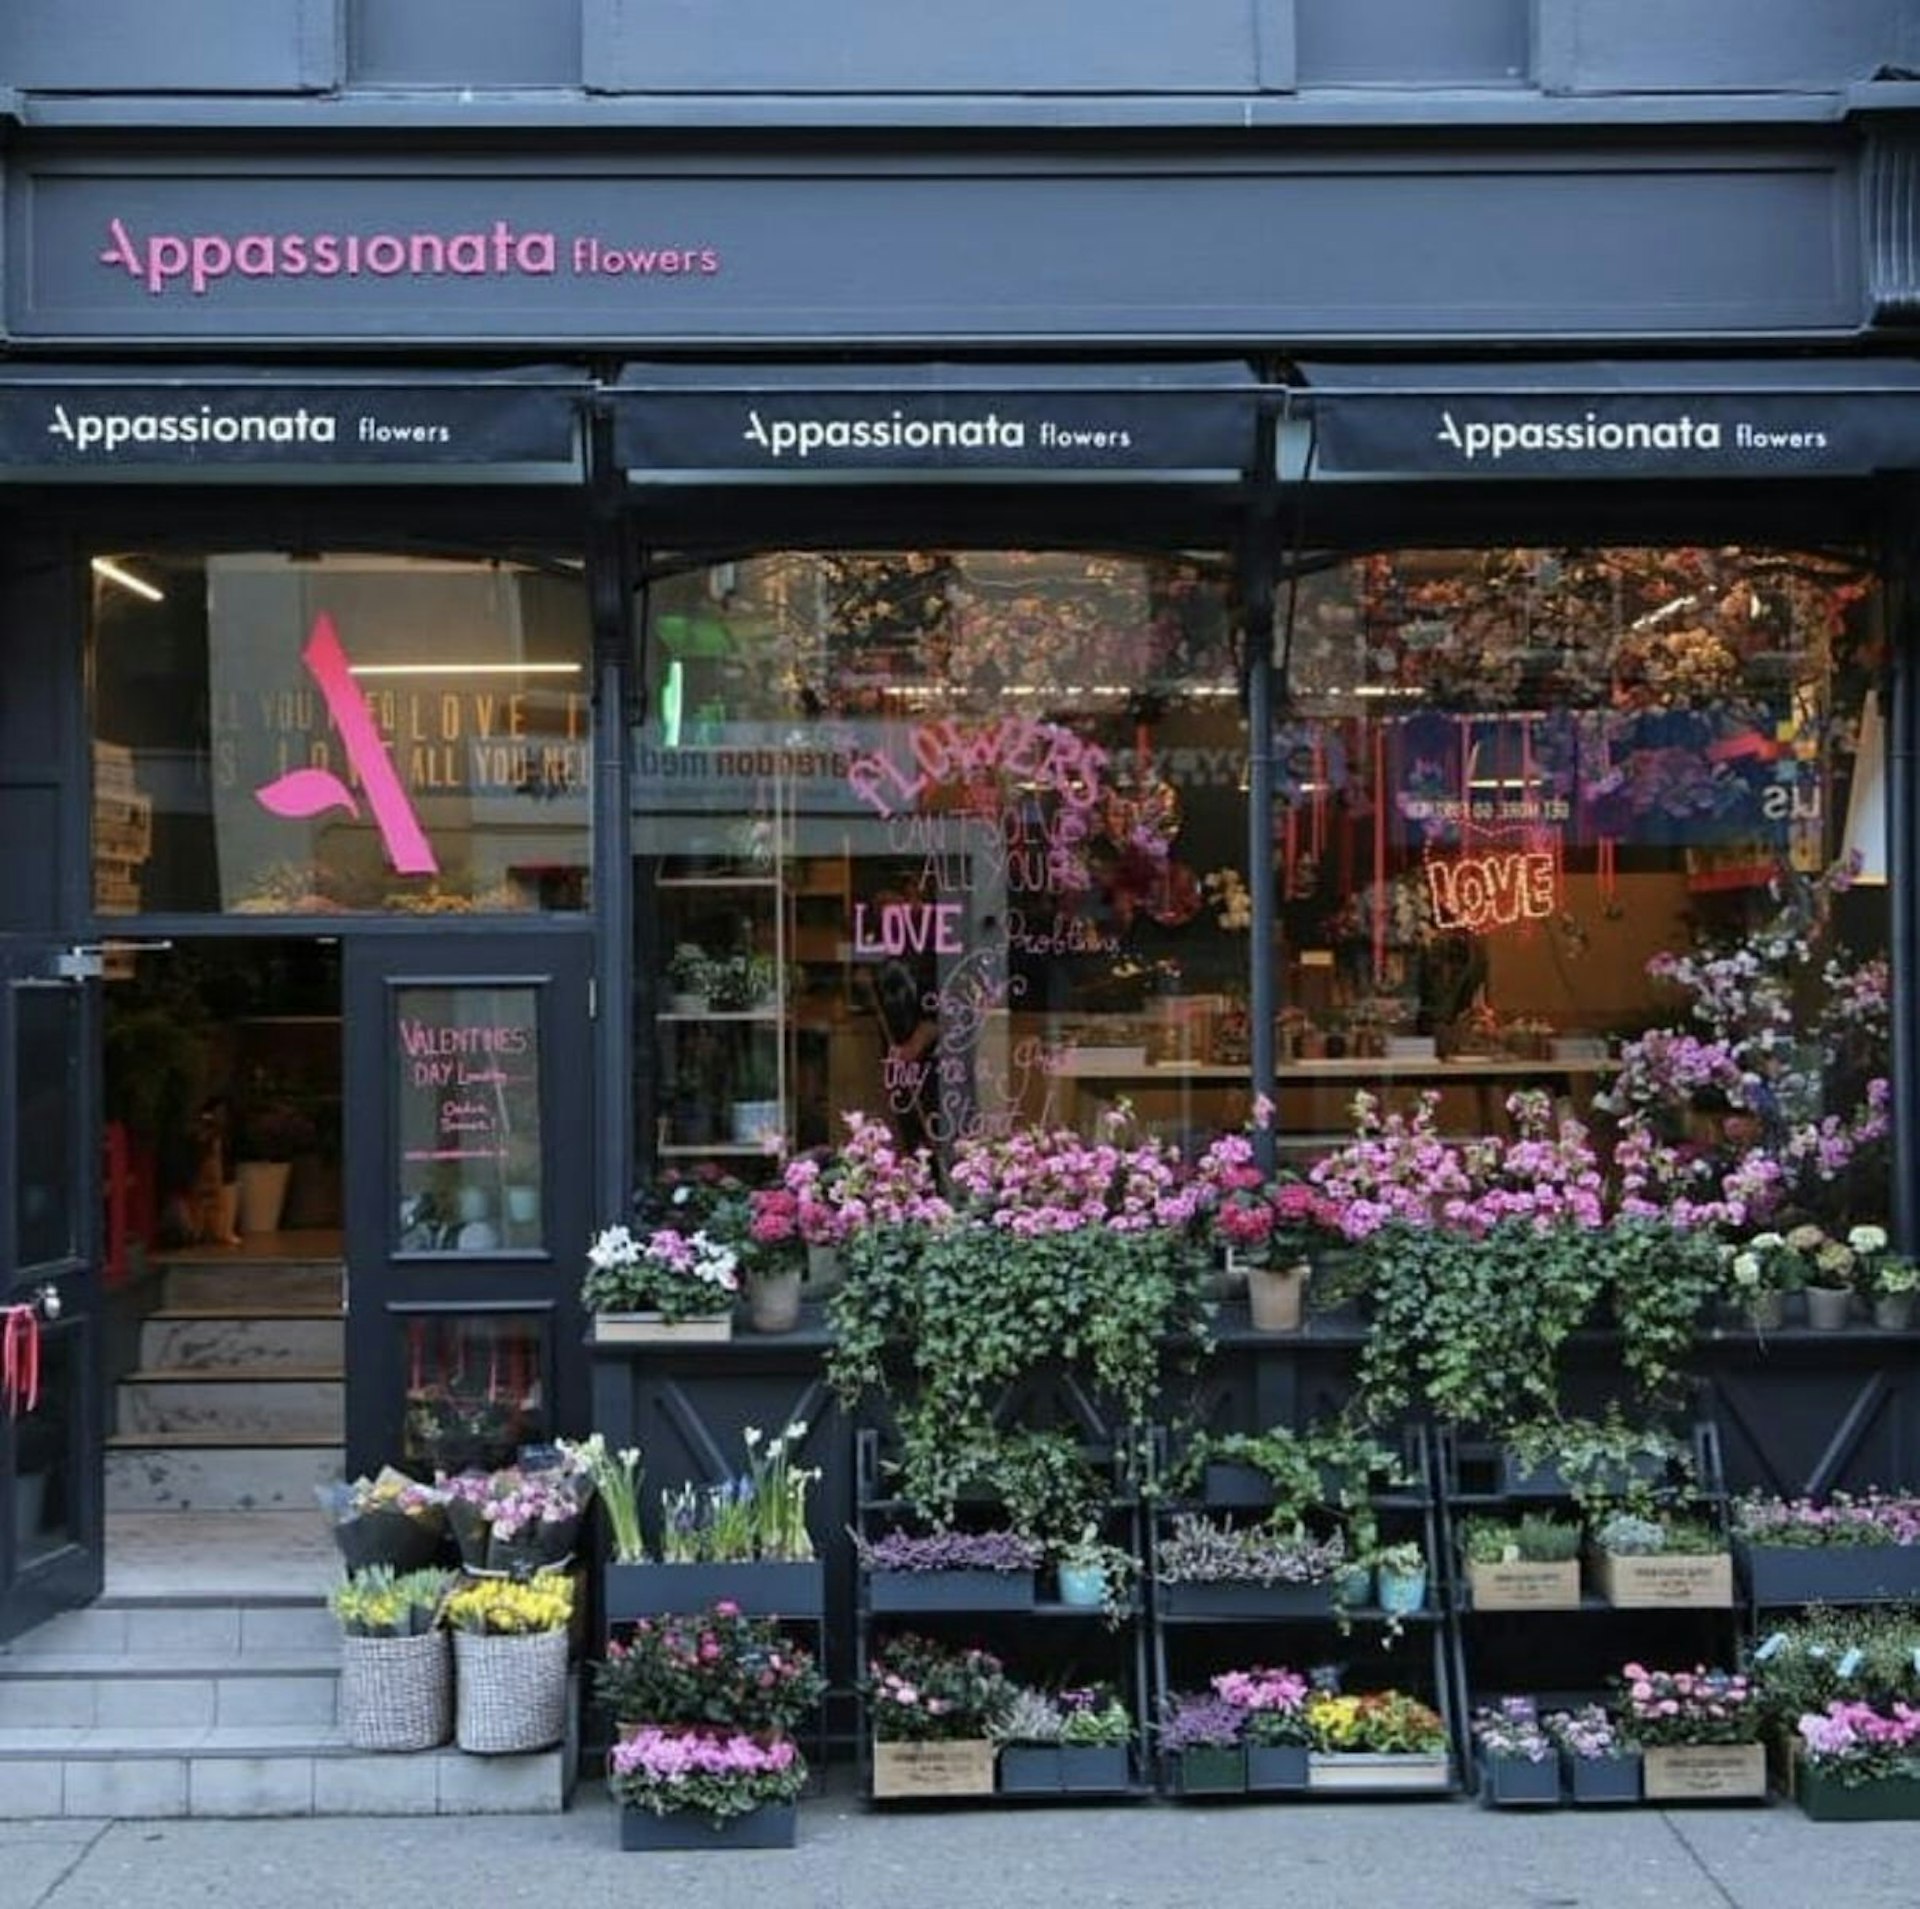 Appassionata Flowers shop front. There are rows of coloured flowers stacked in front of the big windows and black shop front